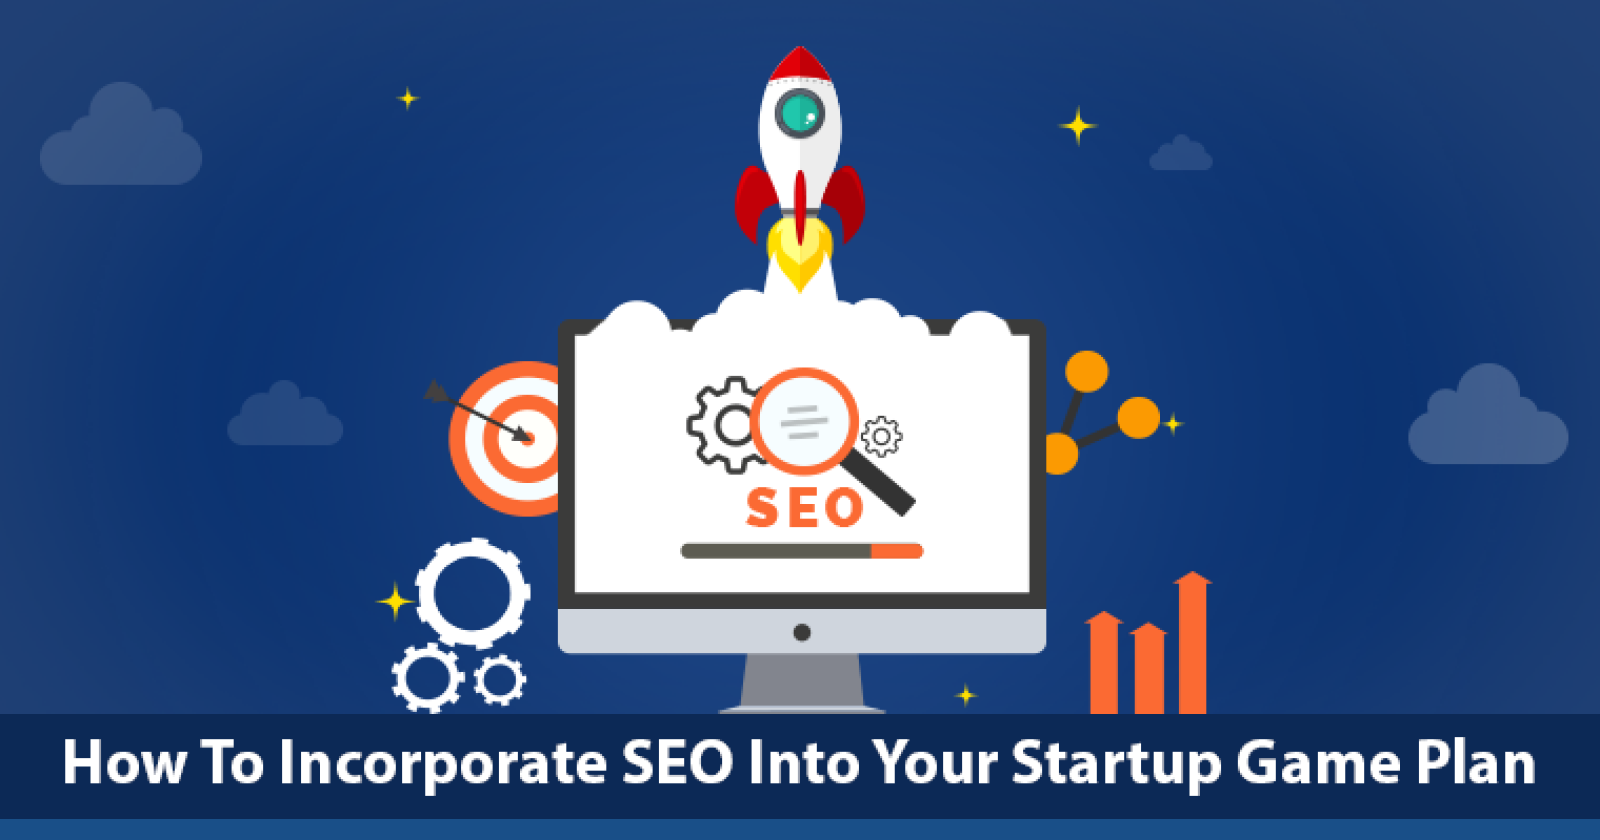 How-To-Incorporate-SEO-Into-Your-Startup-Game-Plan-SEJ